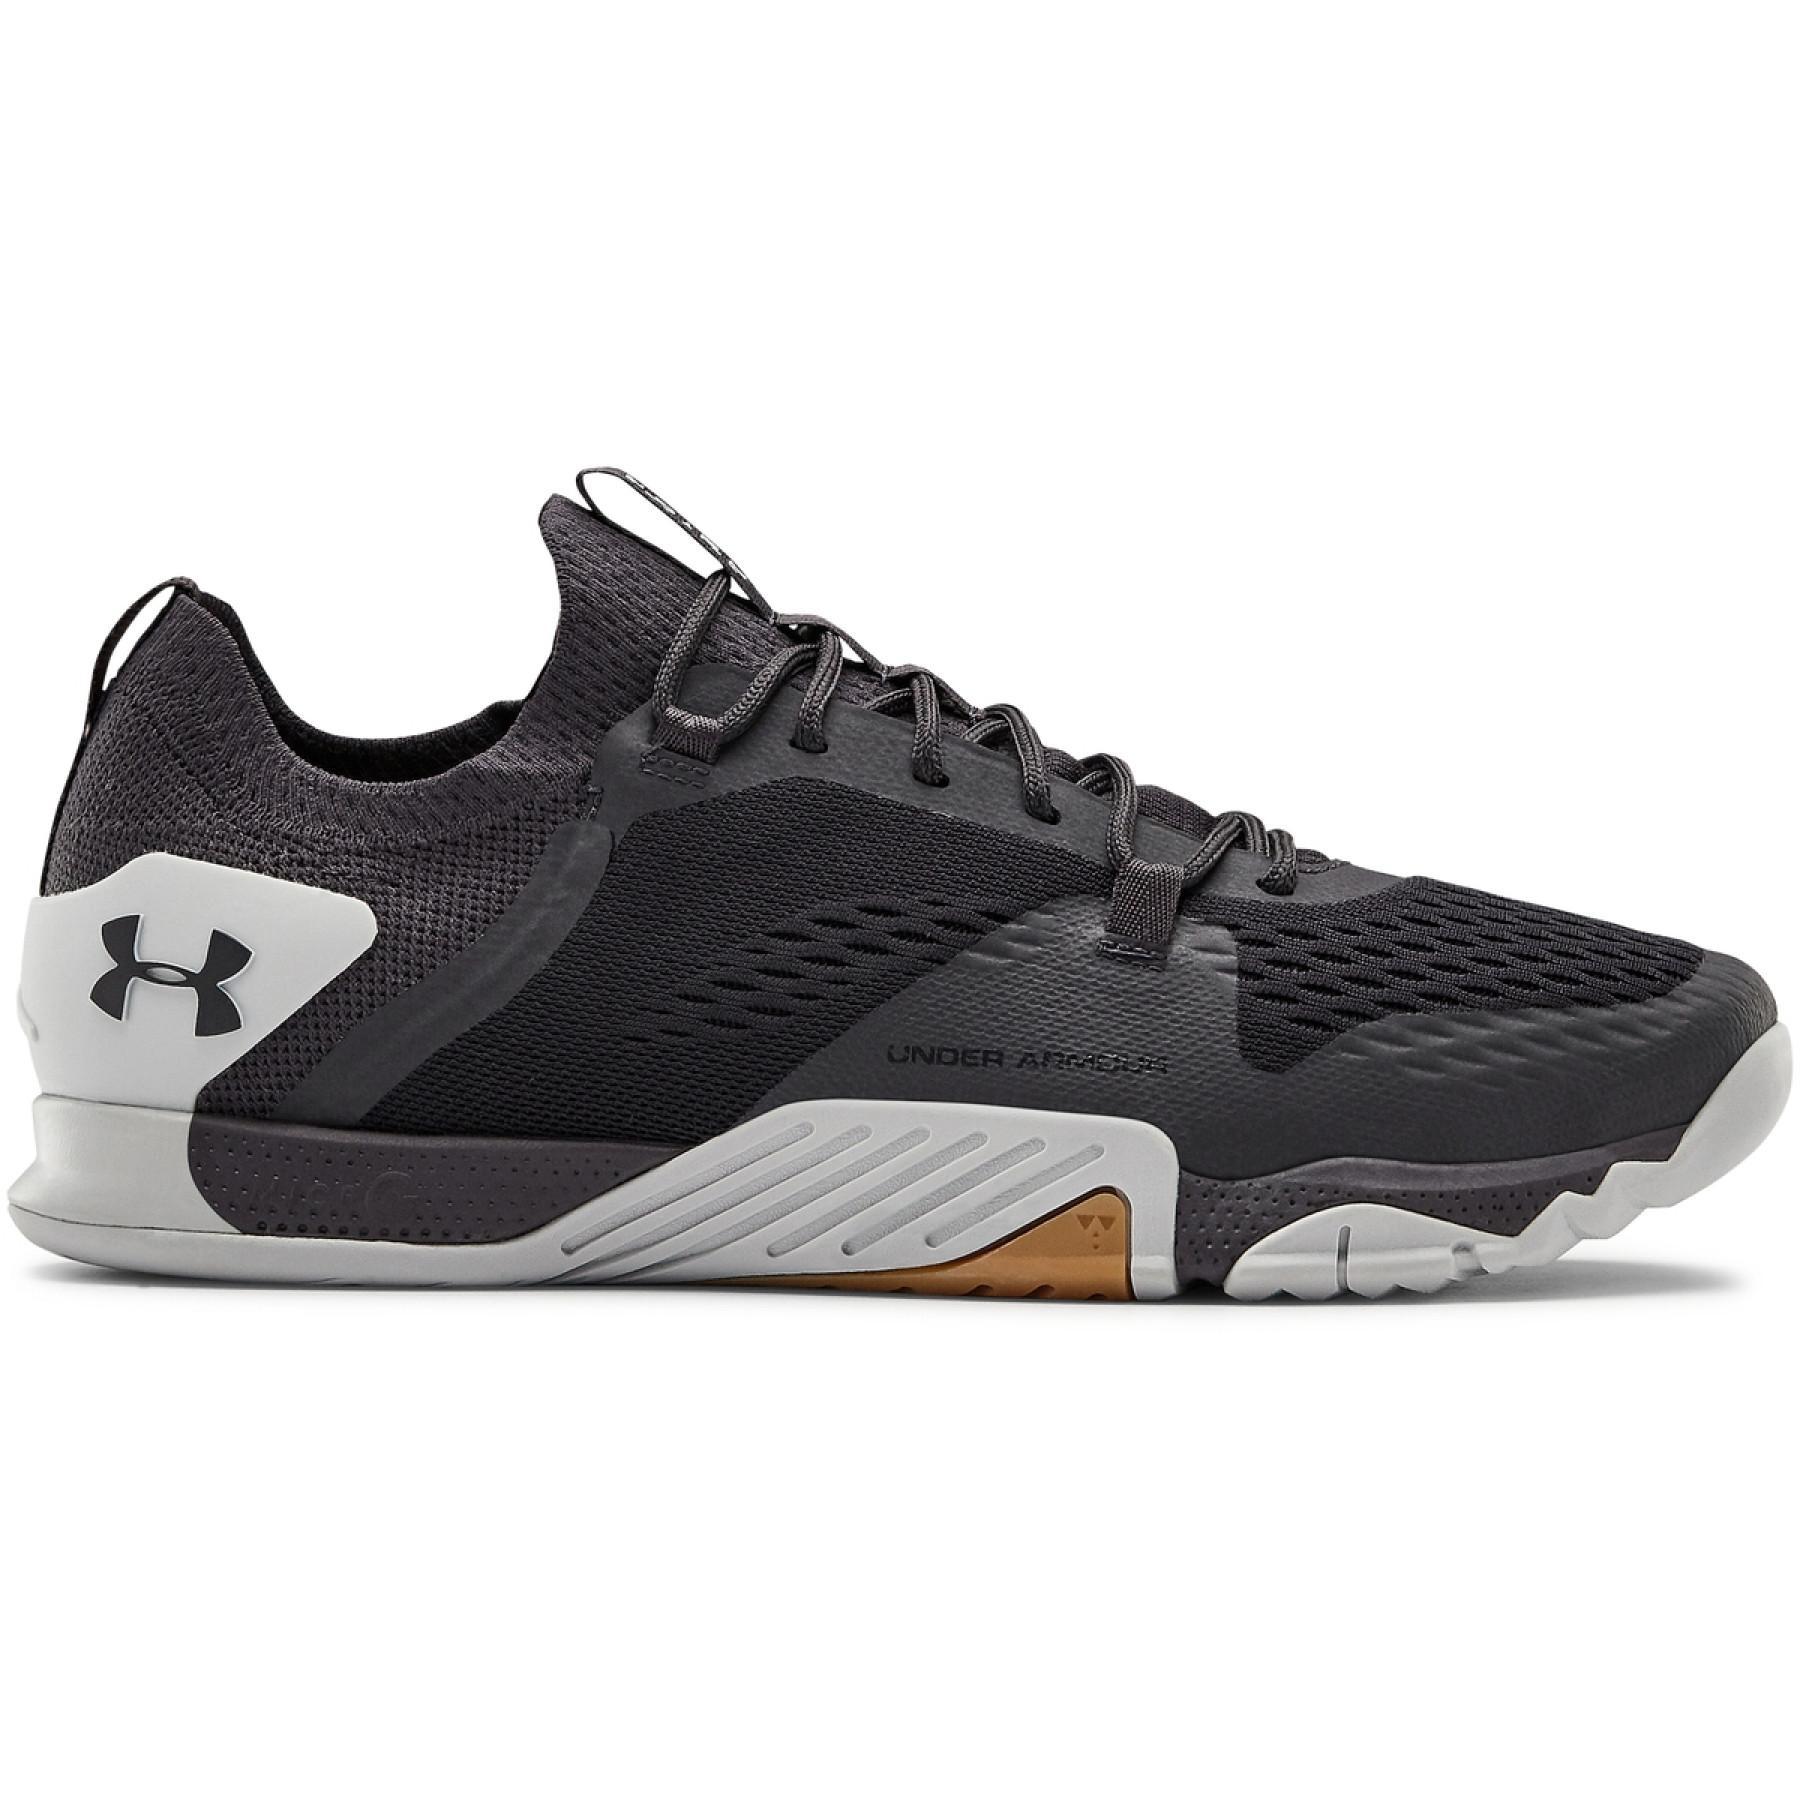 Training shoes Under Armour TriBase Reign 2